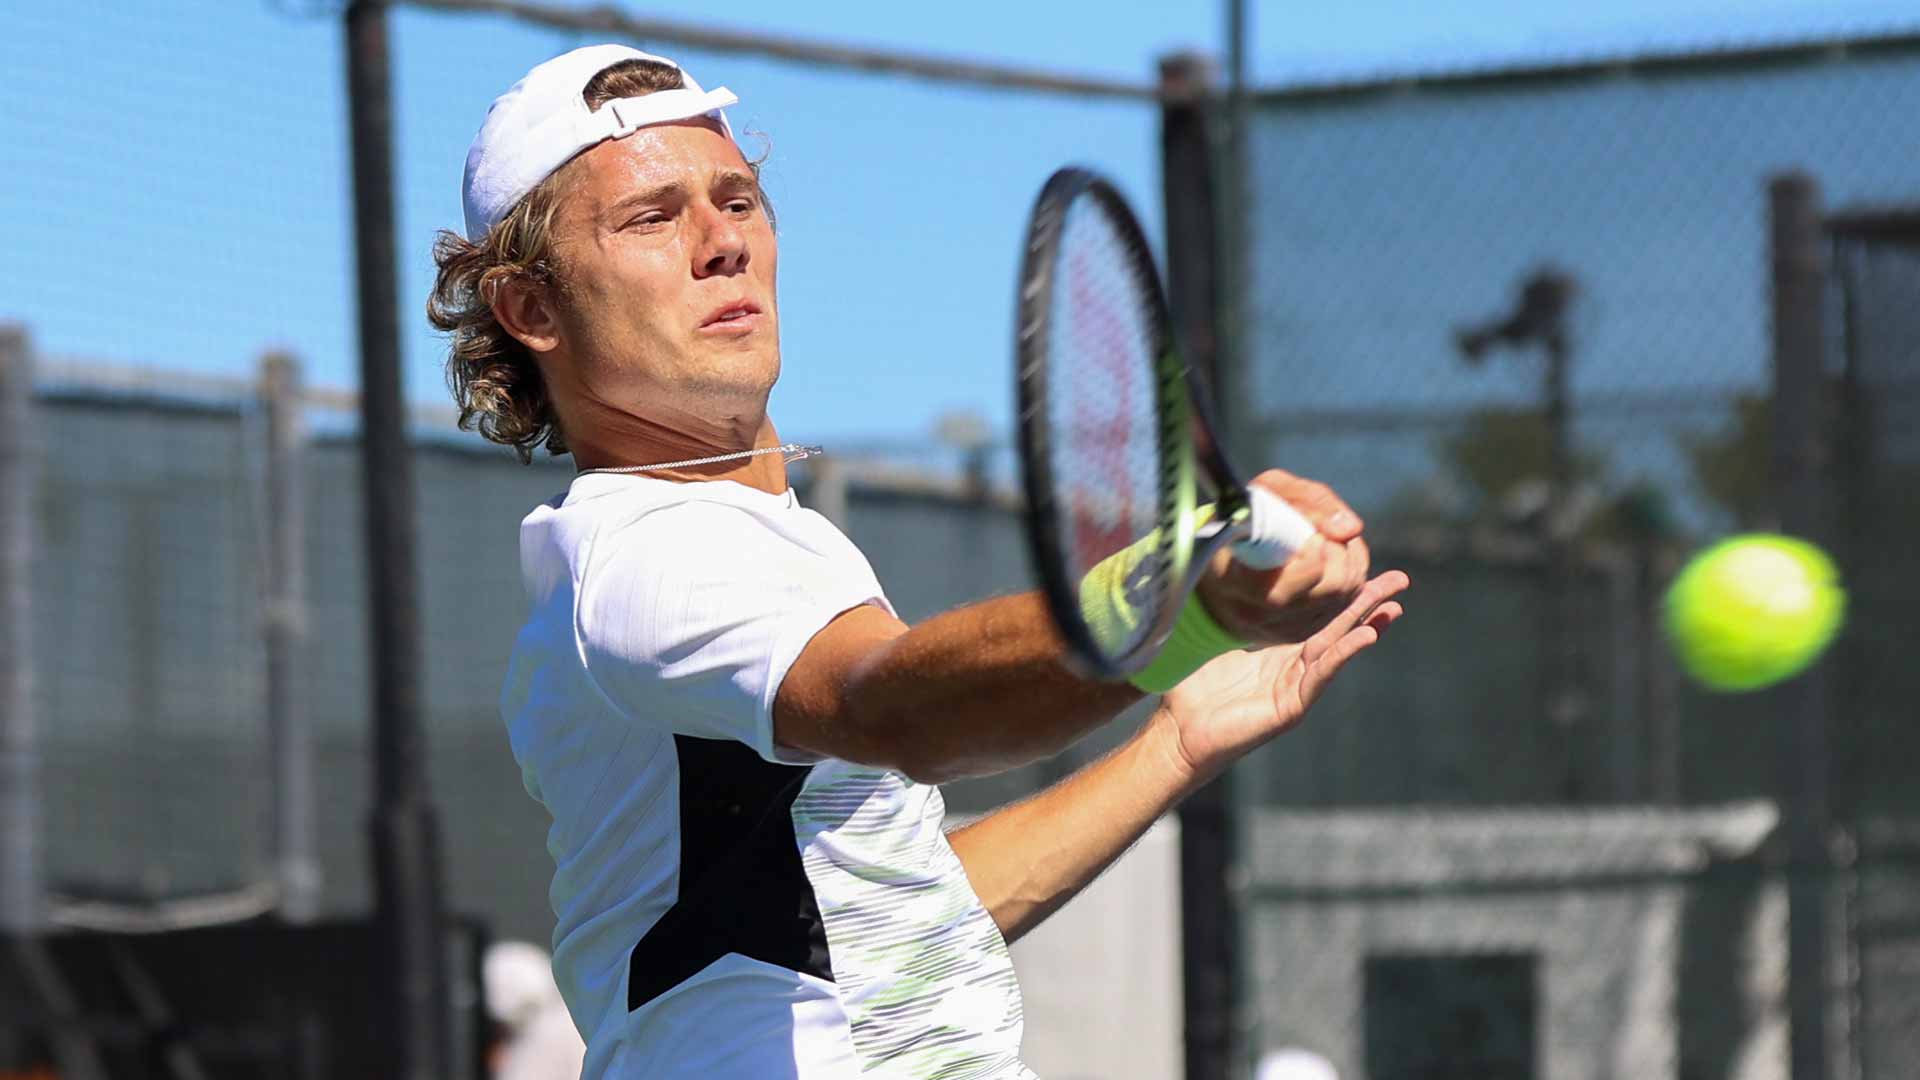 Aleksandar Kovacevic advances to the second round of qualifying at the Phoenix Challenger.